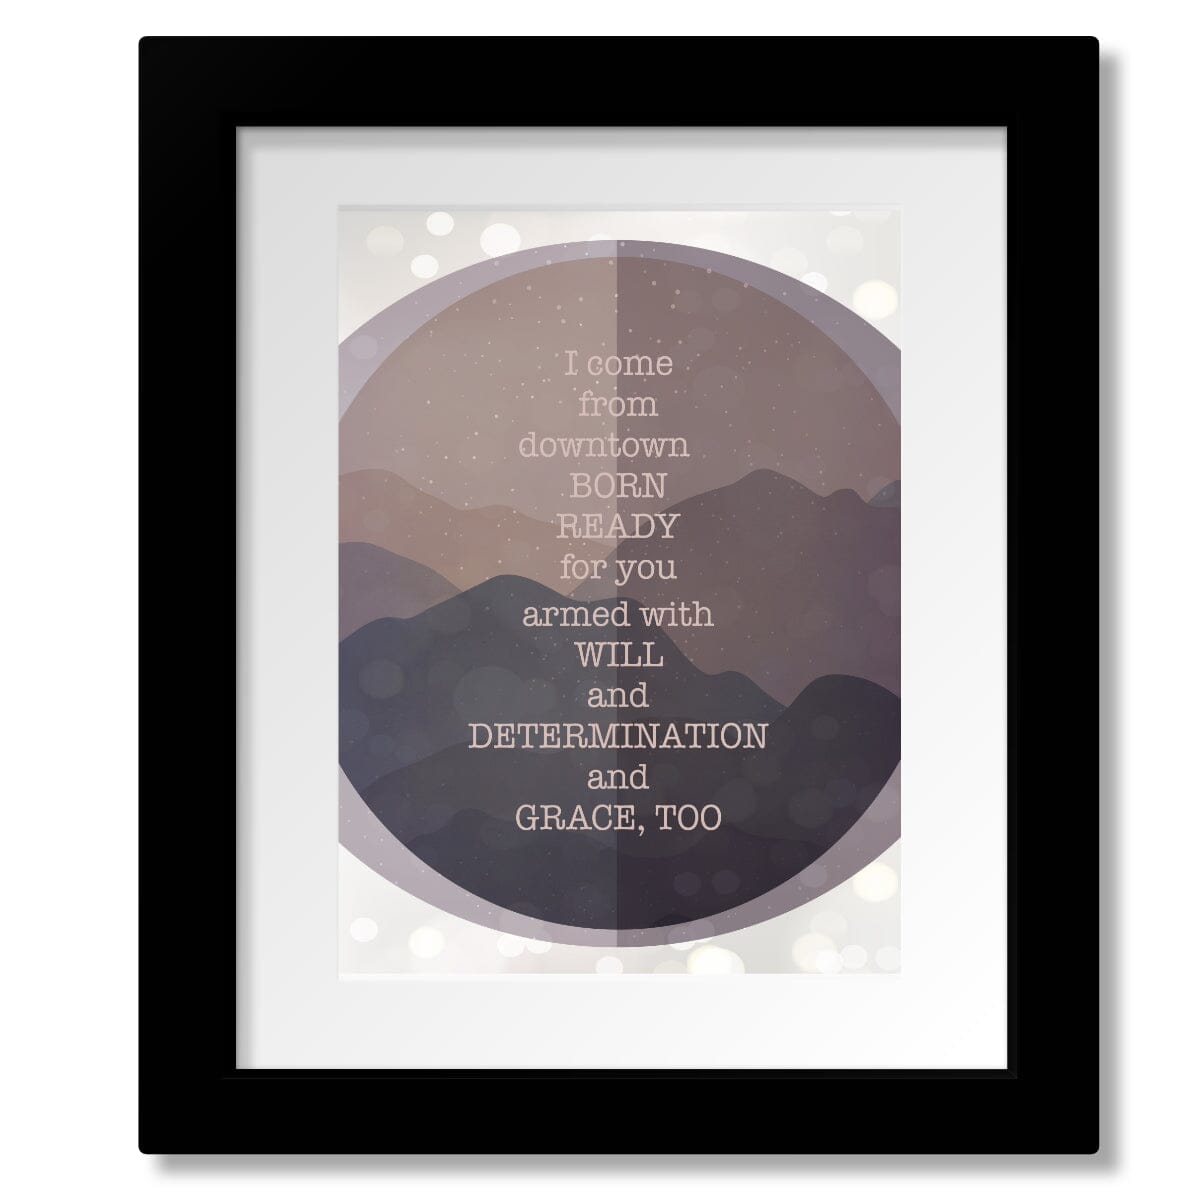 Grace, Too by the Tragically Hip - Music Quote Wall Decor Song Lyrics Art Song Lyrics Art 8x10 Matted and Framed Print 